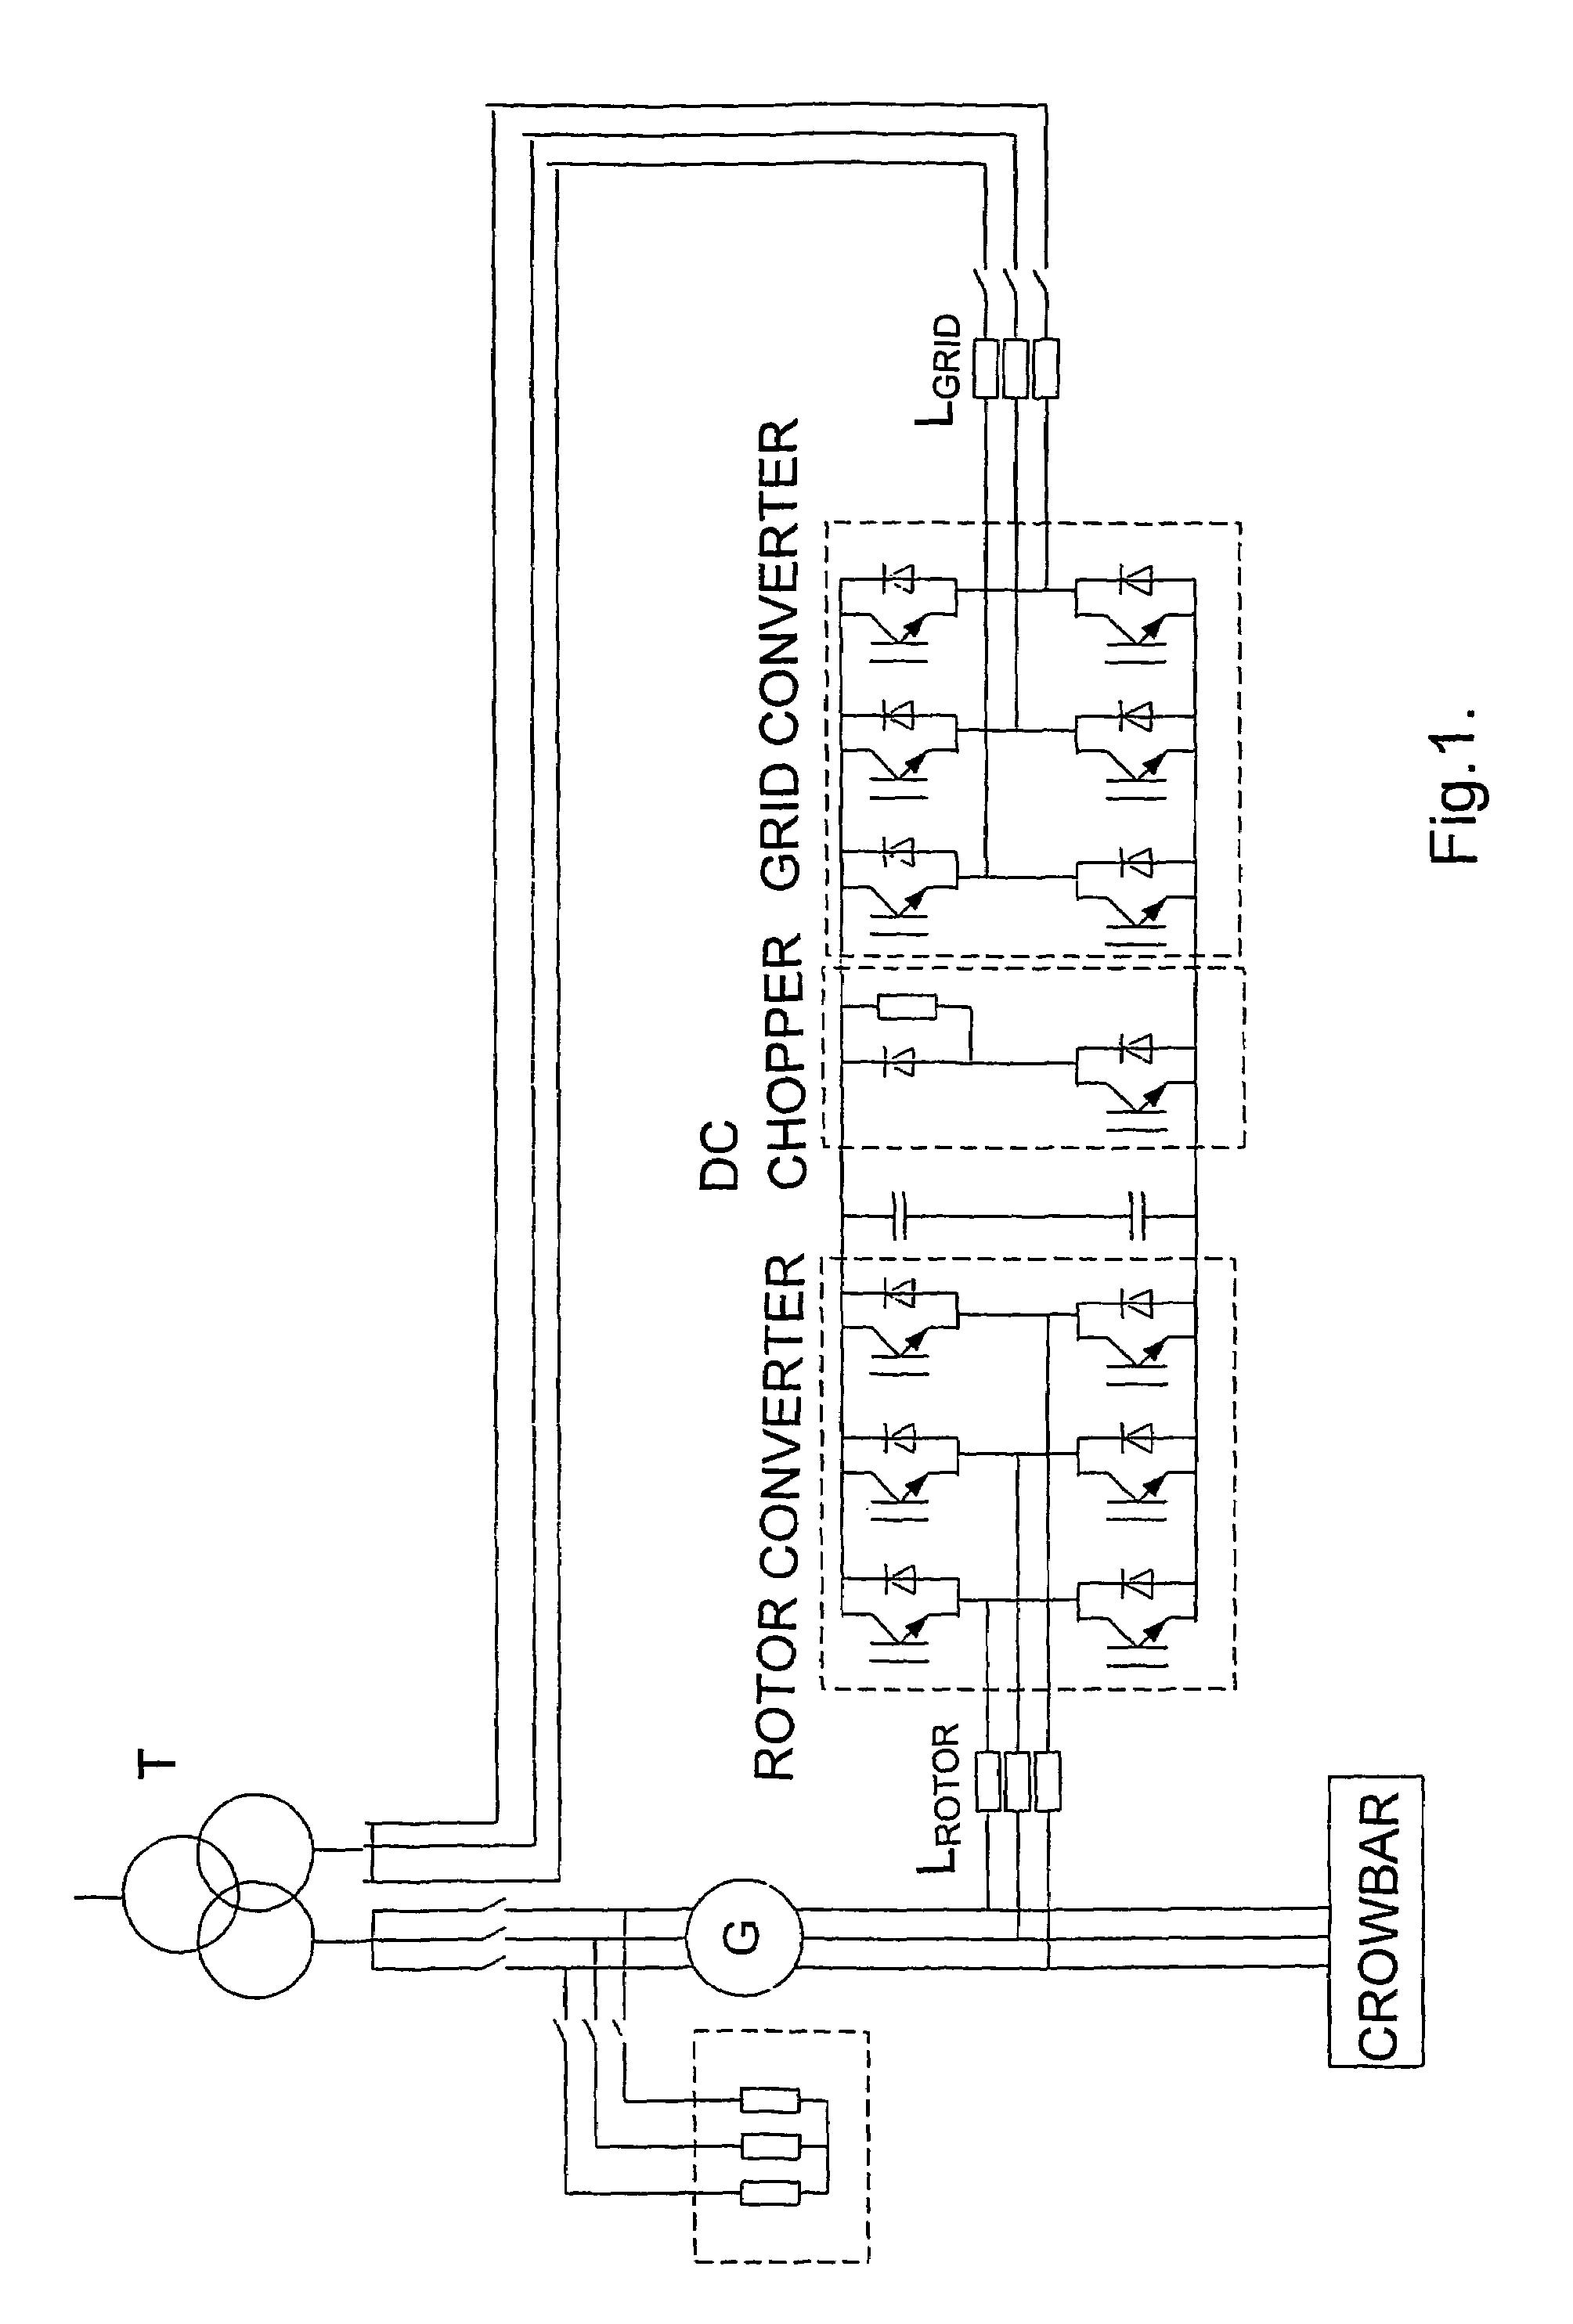 Method for controlling a power-grid connected wind turbine generator during grid faults and apparatus for implementing said method